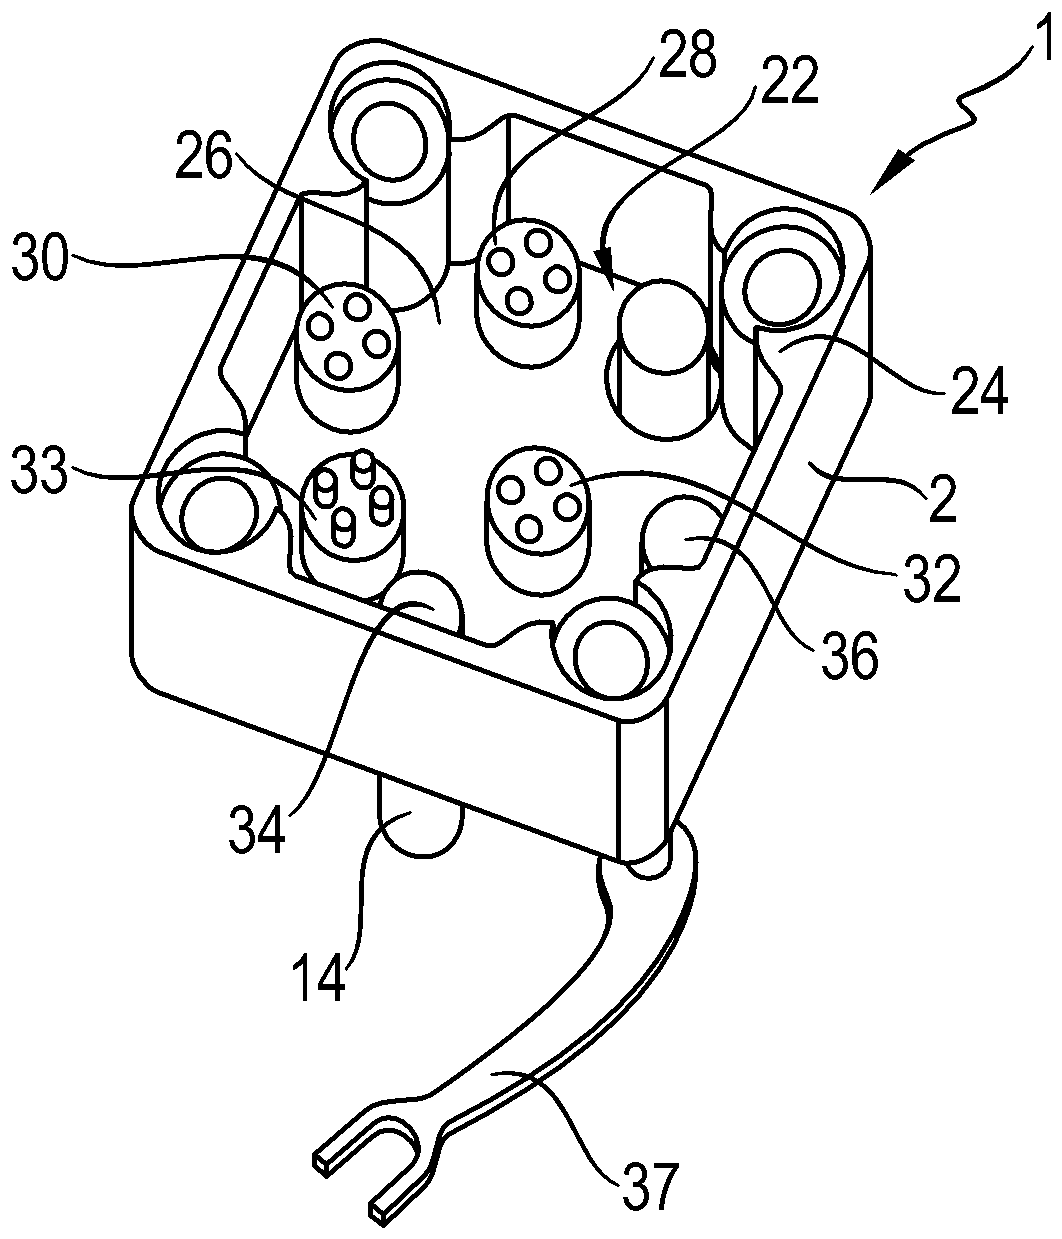 Sensor device for hydraulic plunger units